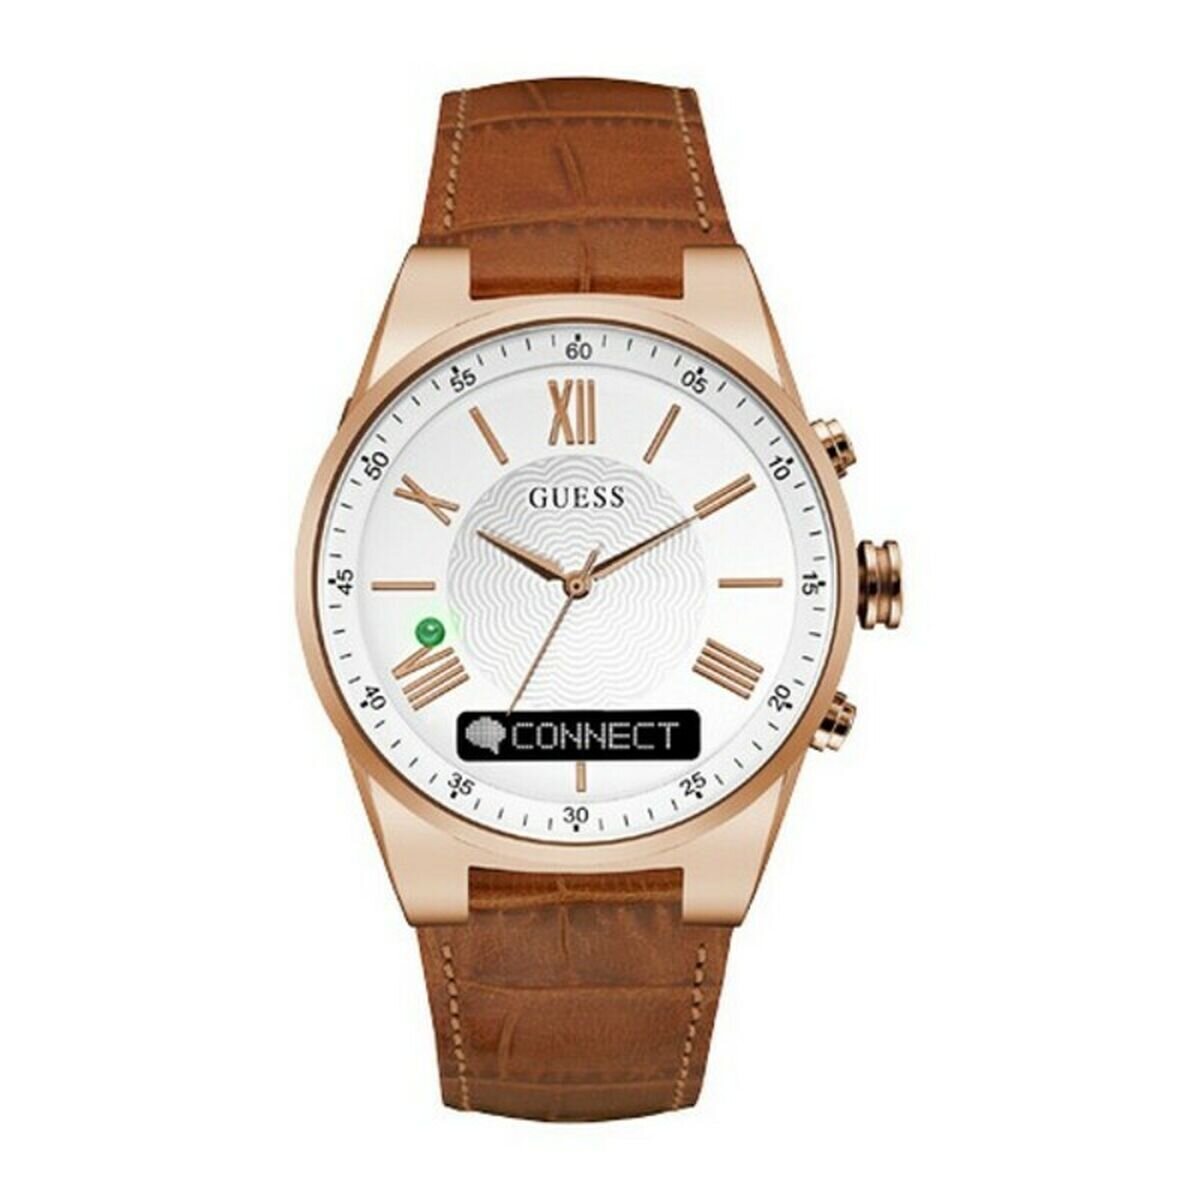 Men's Guess Connect Watch